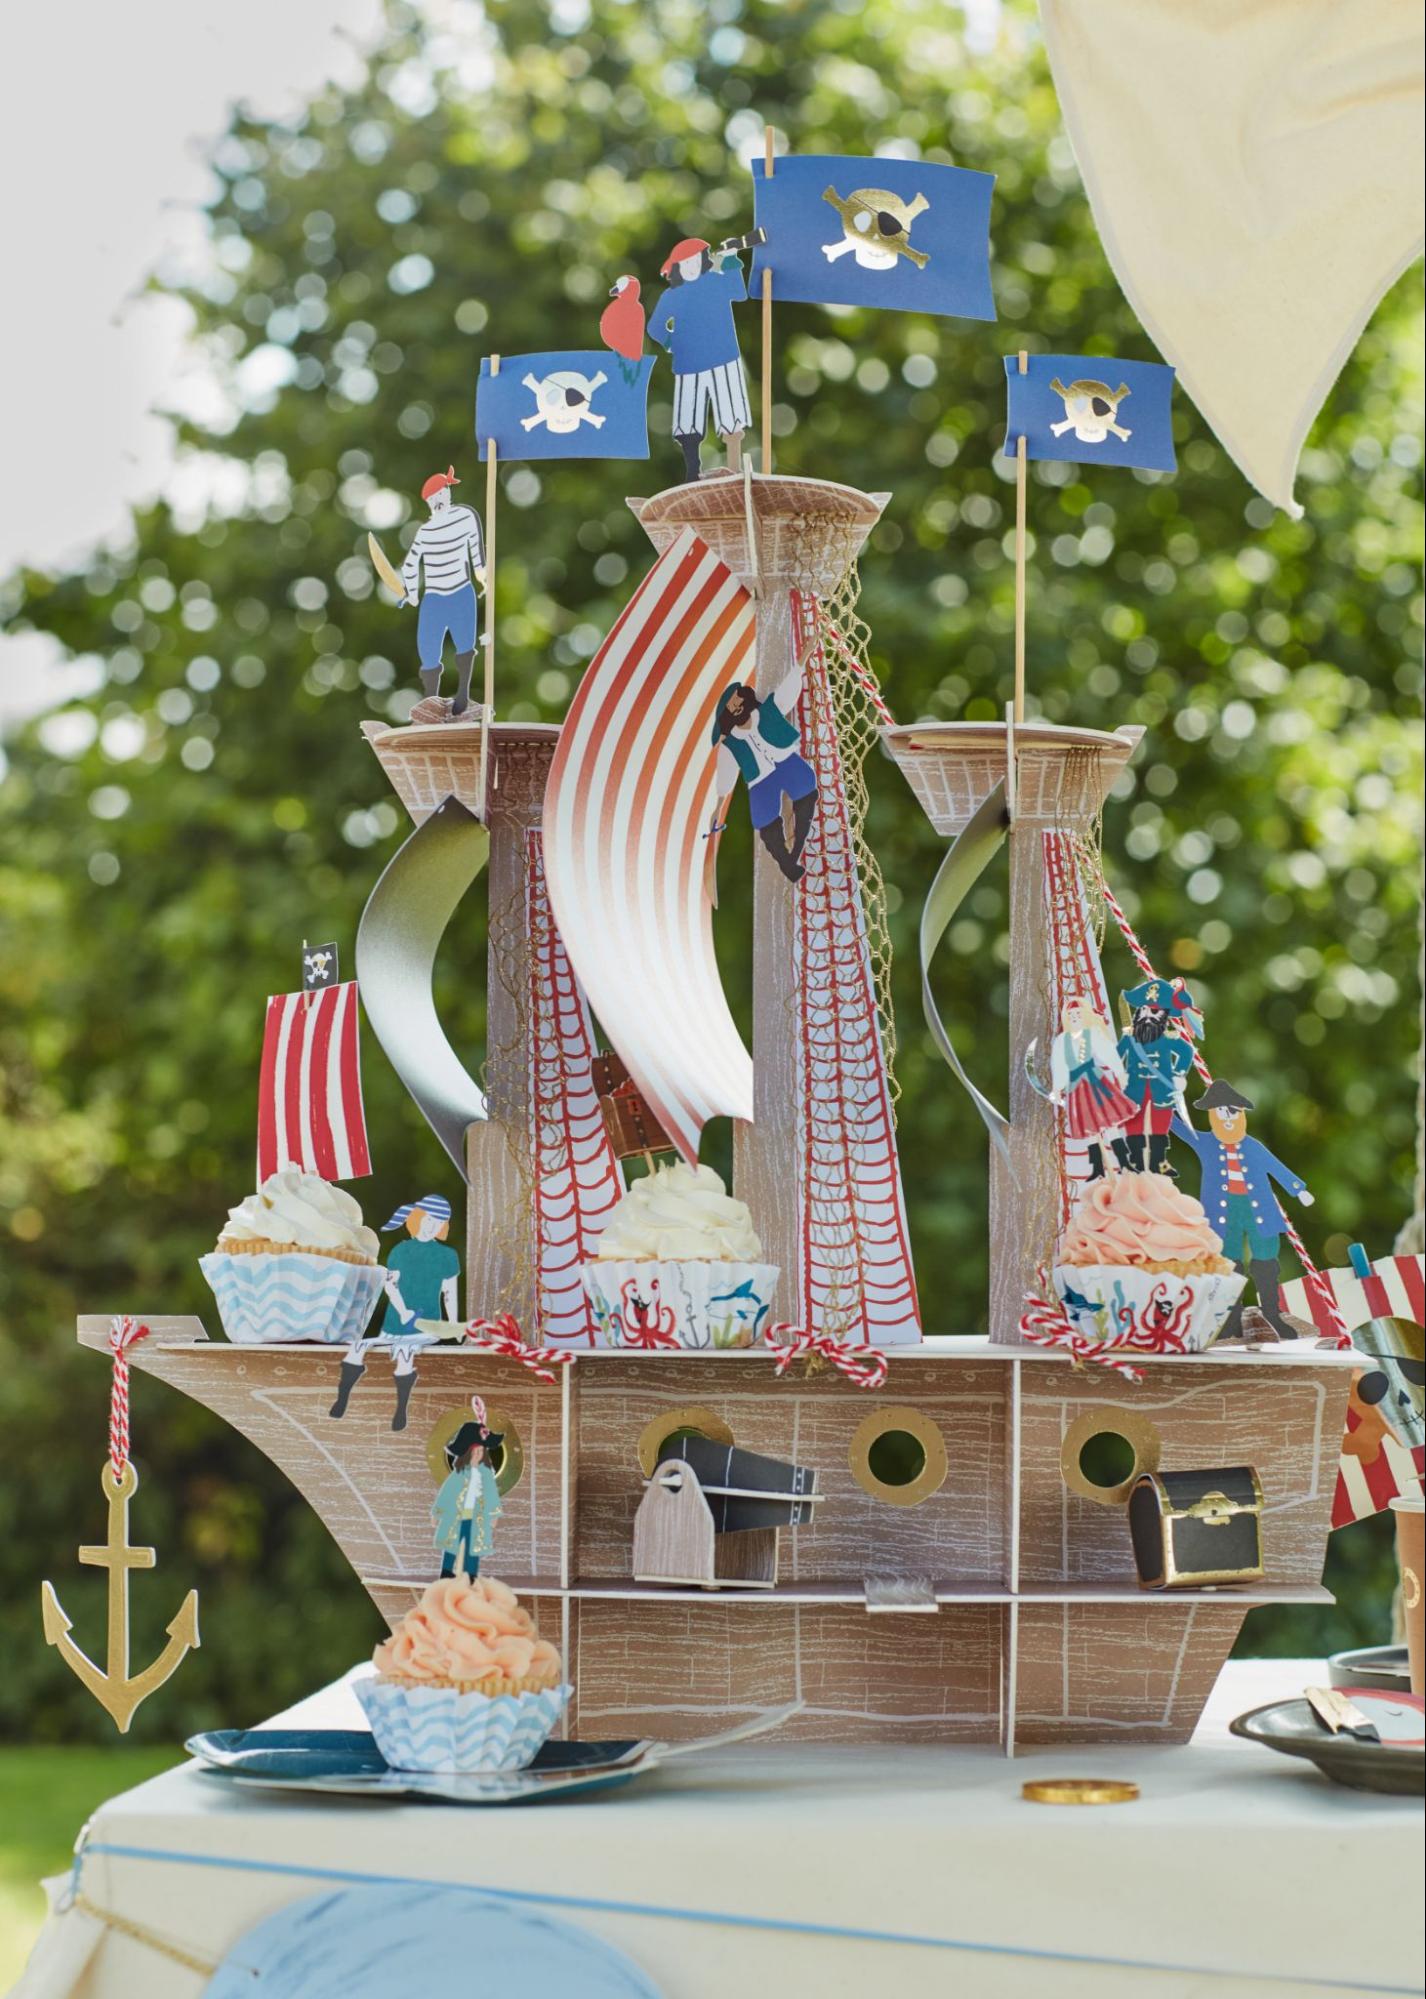 Pirate ship decoration with pirate birthday party cupcakes and pirate-themed toppers.